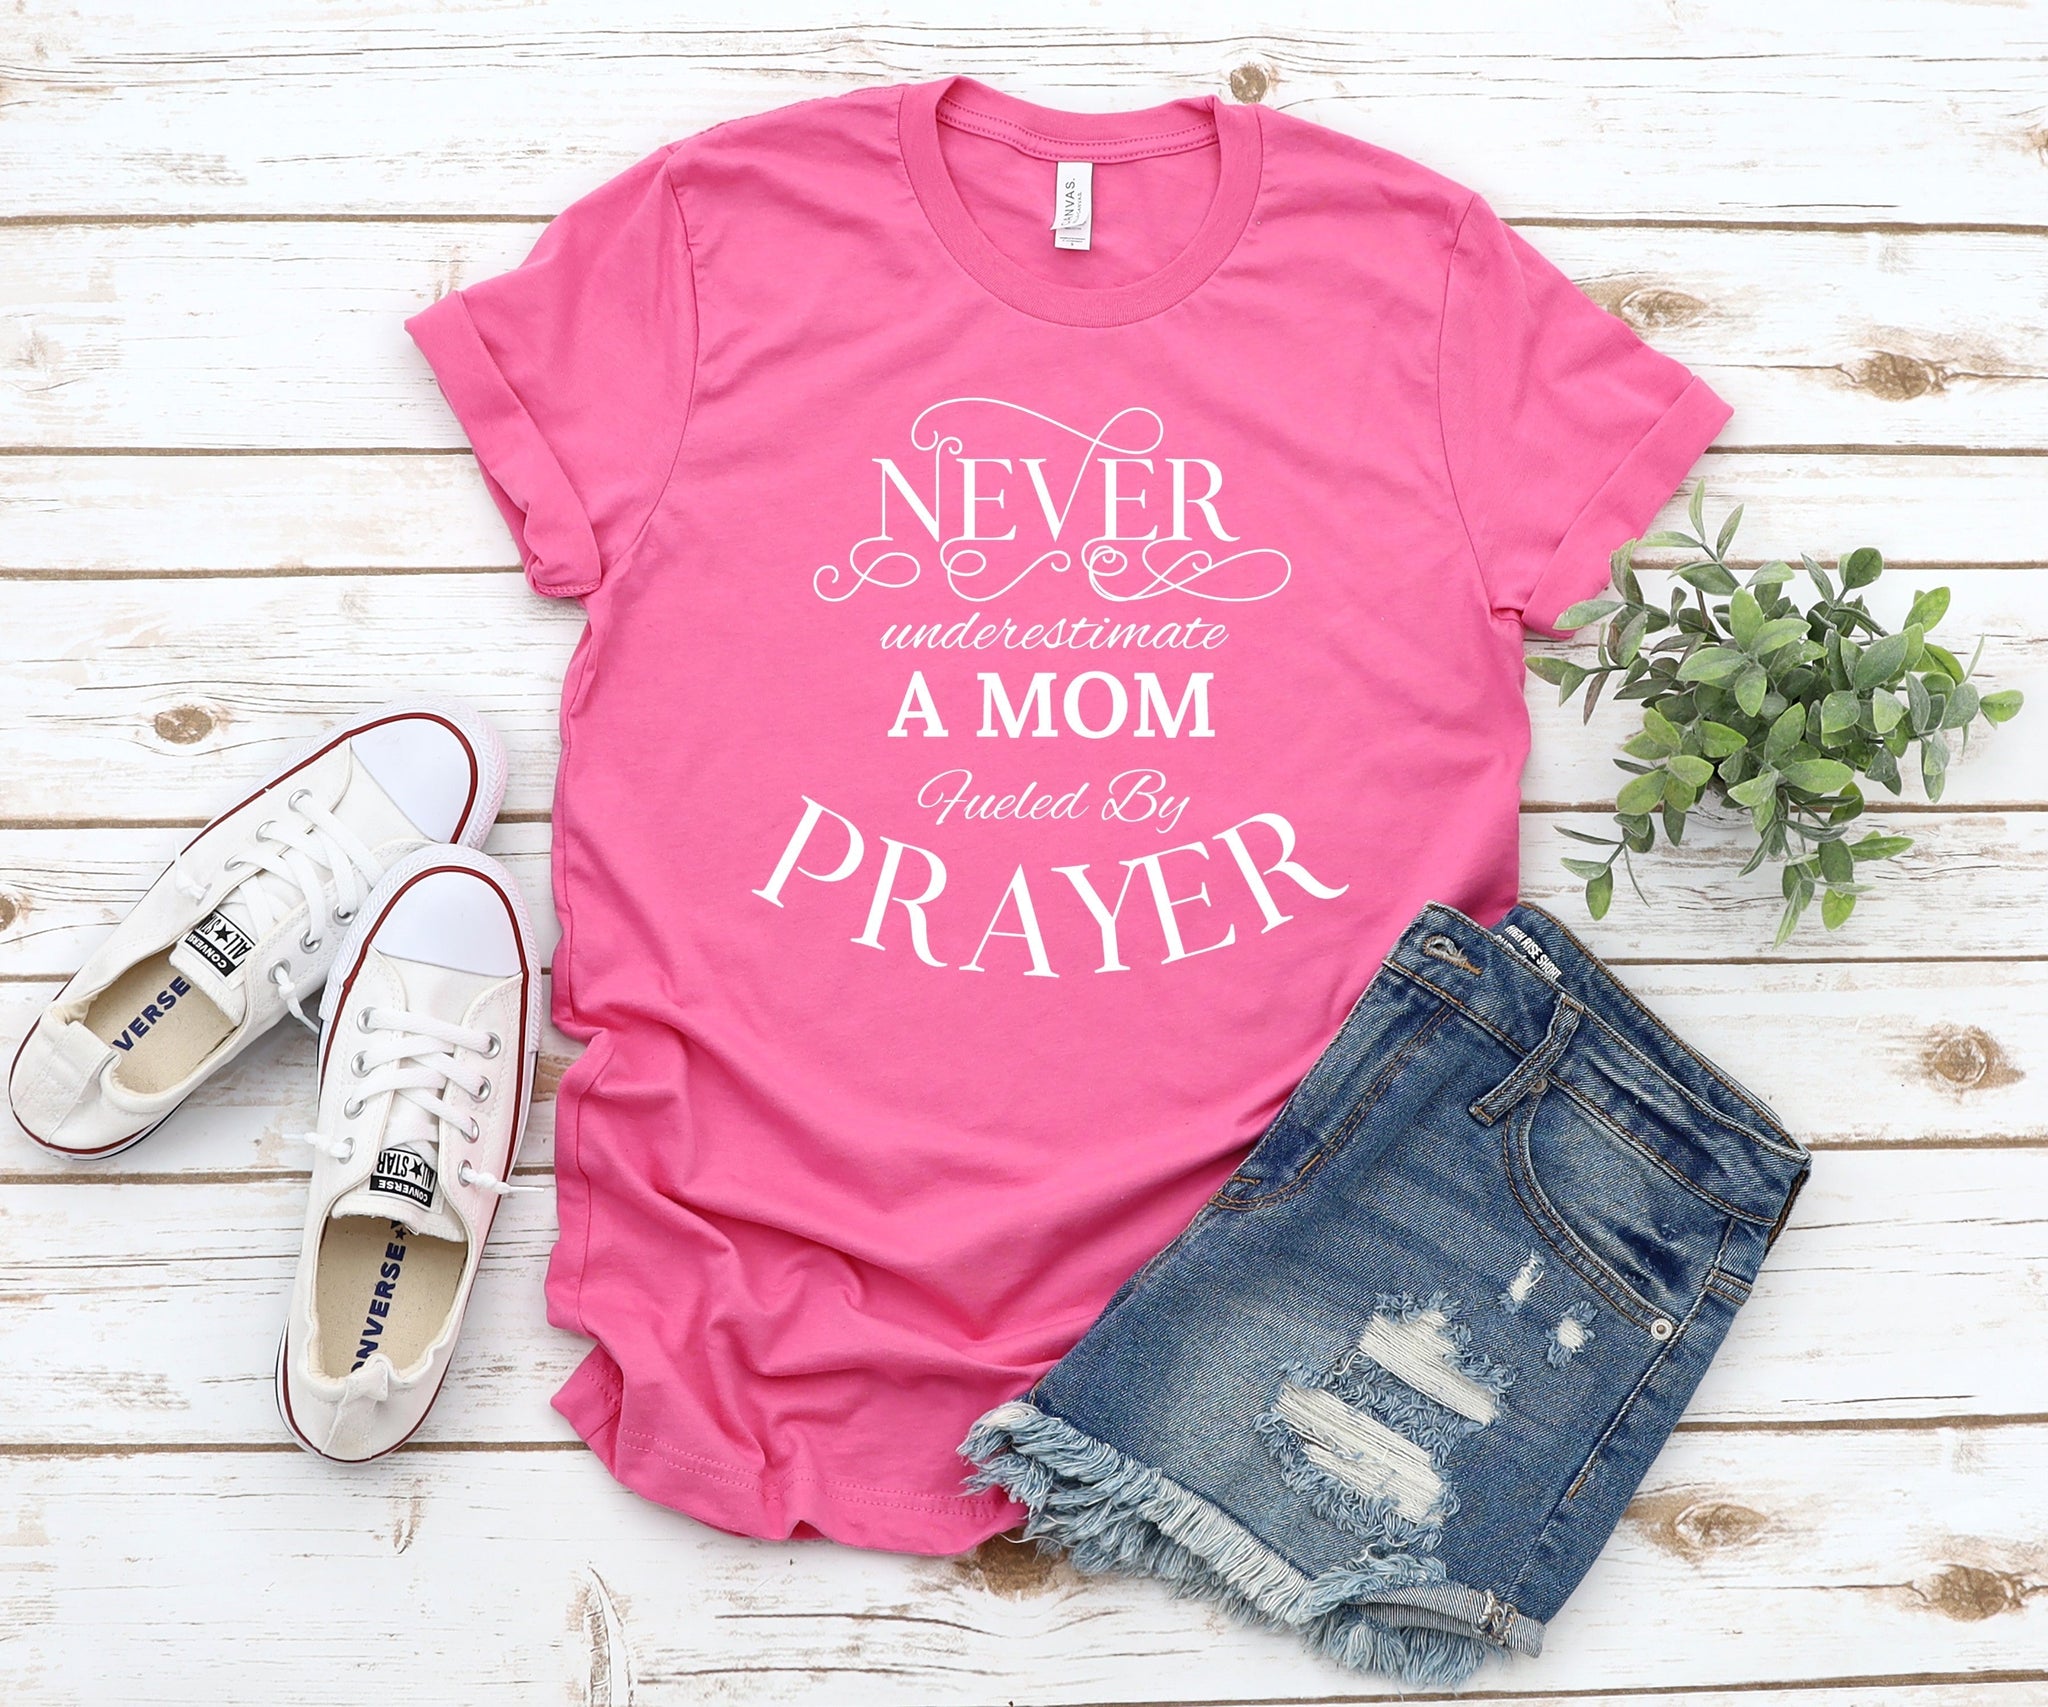 NEW! Never Underestimate A Mom Fueked By Prayer |Mother's Gift| Women's Christian T shirt| Pray Shirt|  S-XXXL upon availability